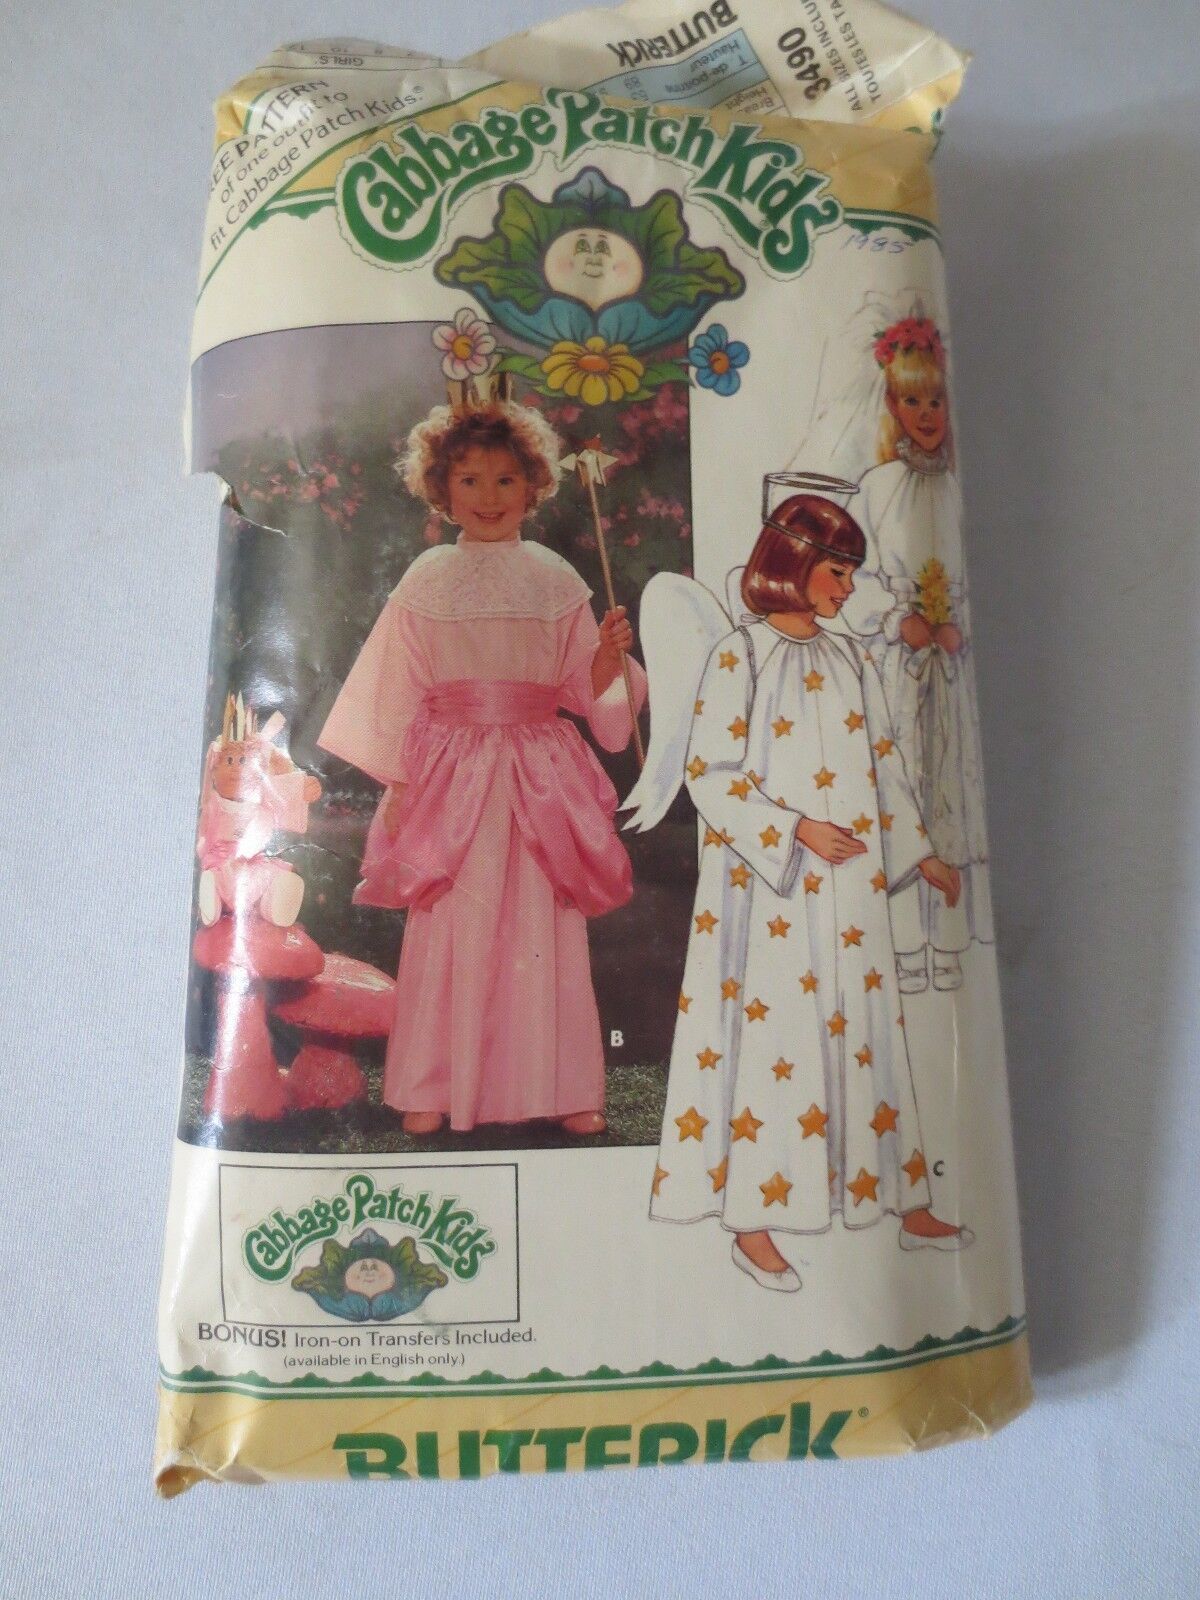 Butterick 3490 Cabbage Patch Kids gown Fairy Bride and doll Size 4 - 14 - $2.00